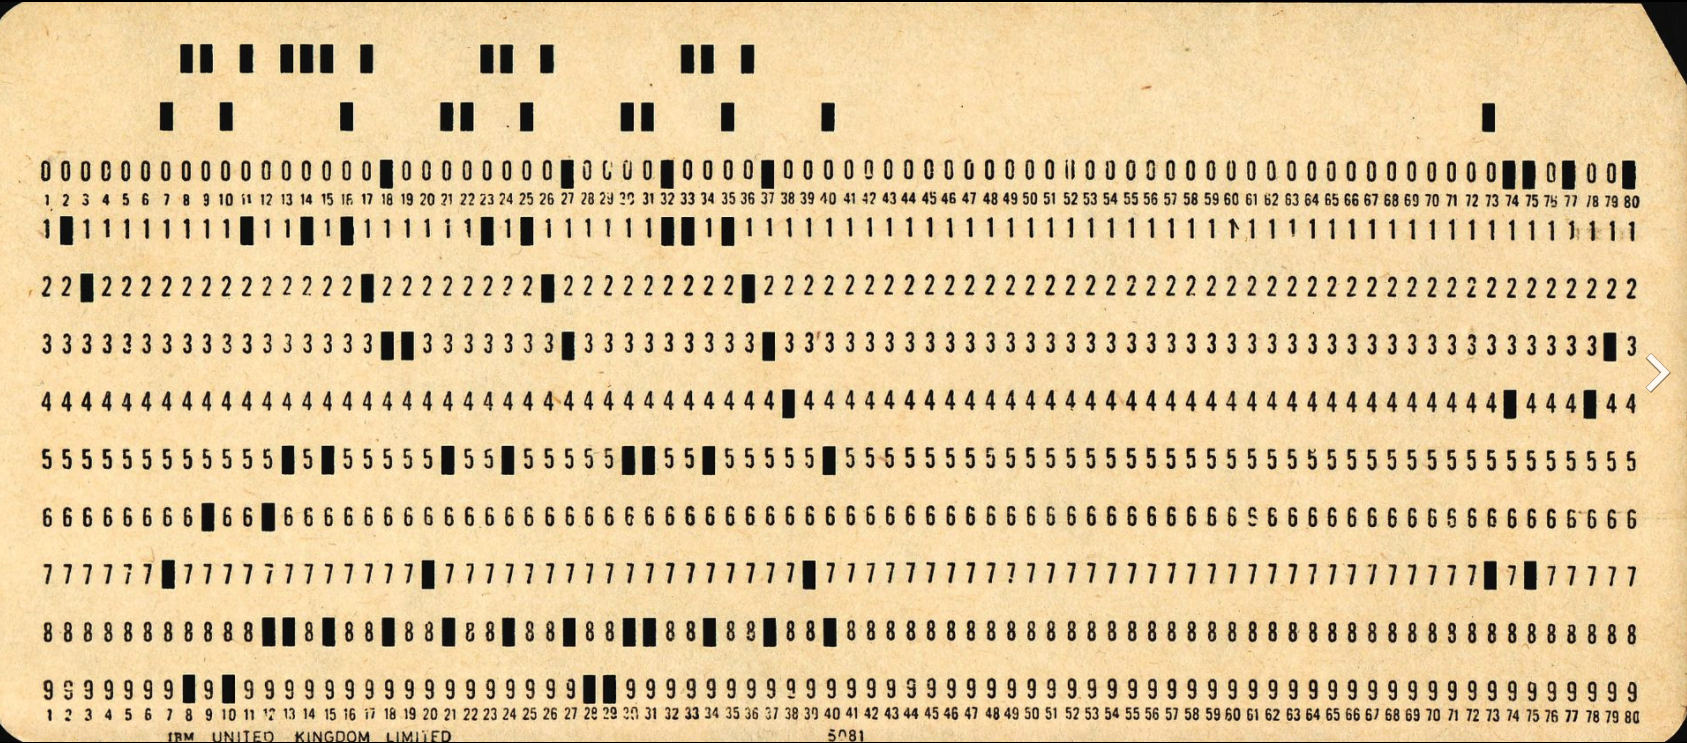 A 12-row/80-column IBM punched card.